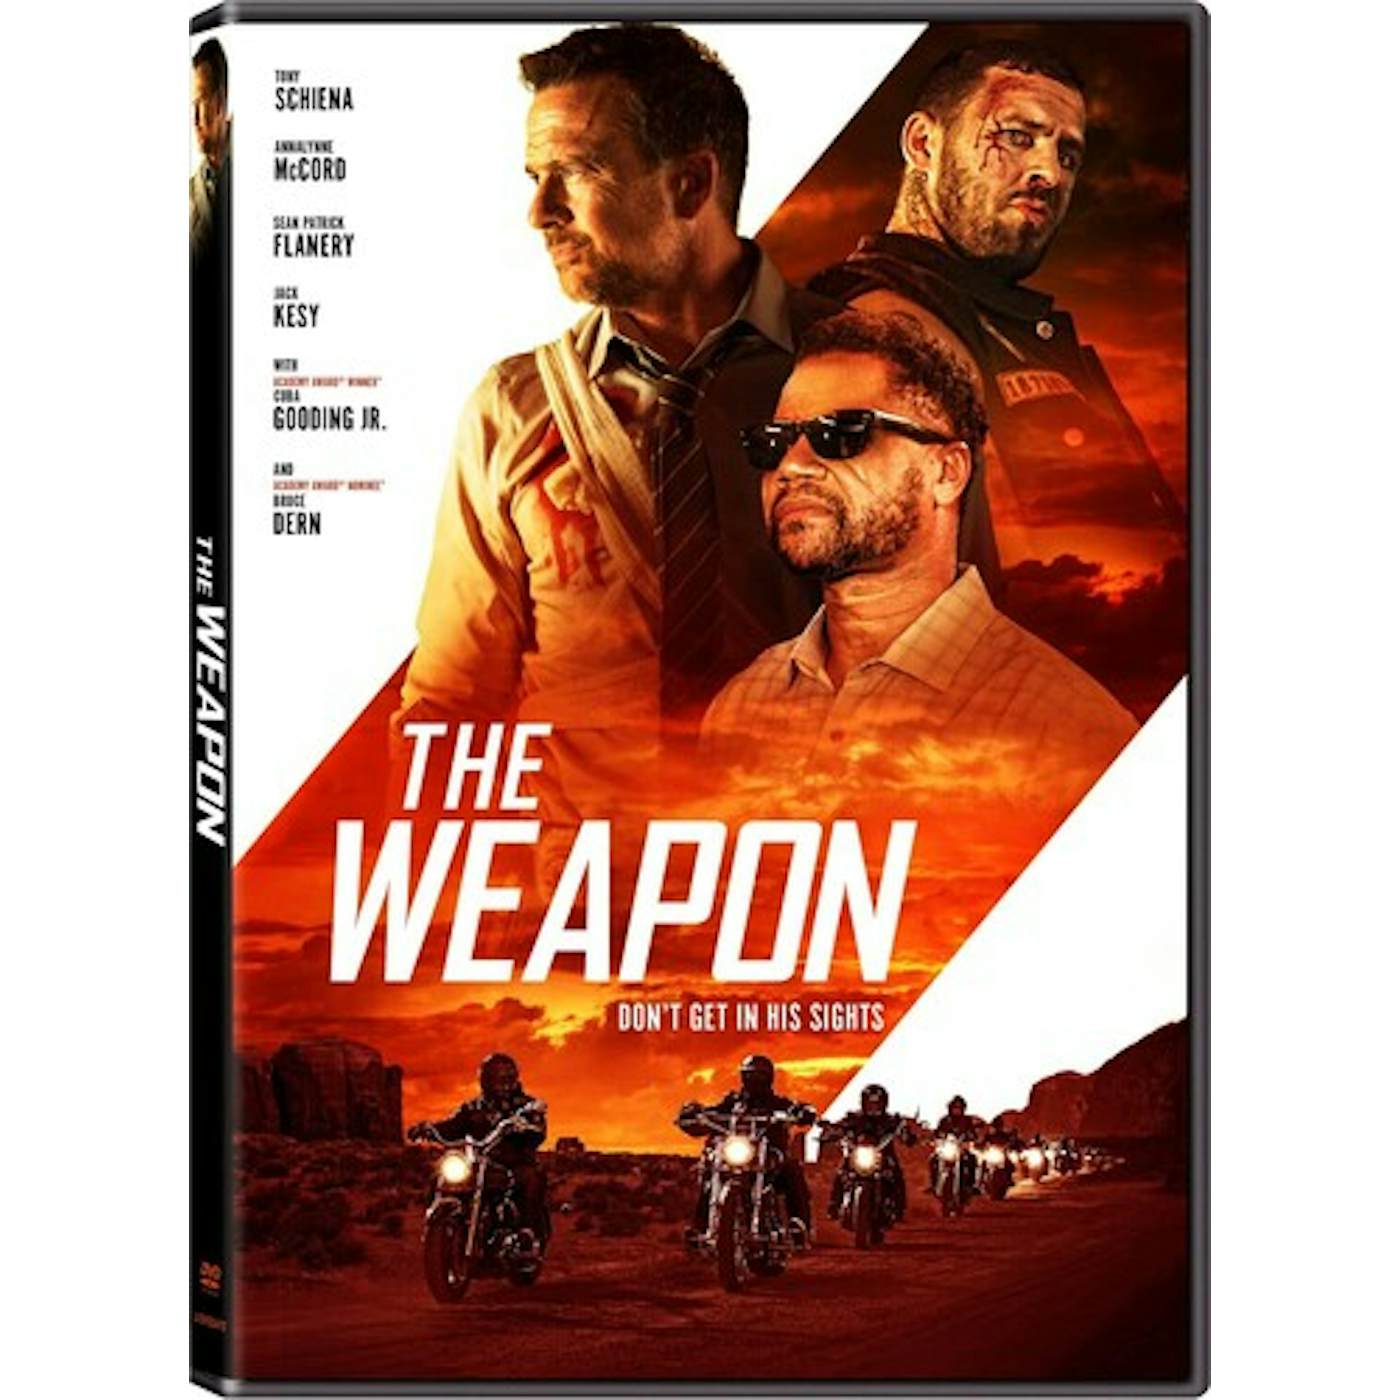 WEAPON DVD